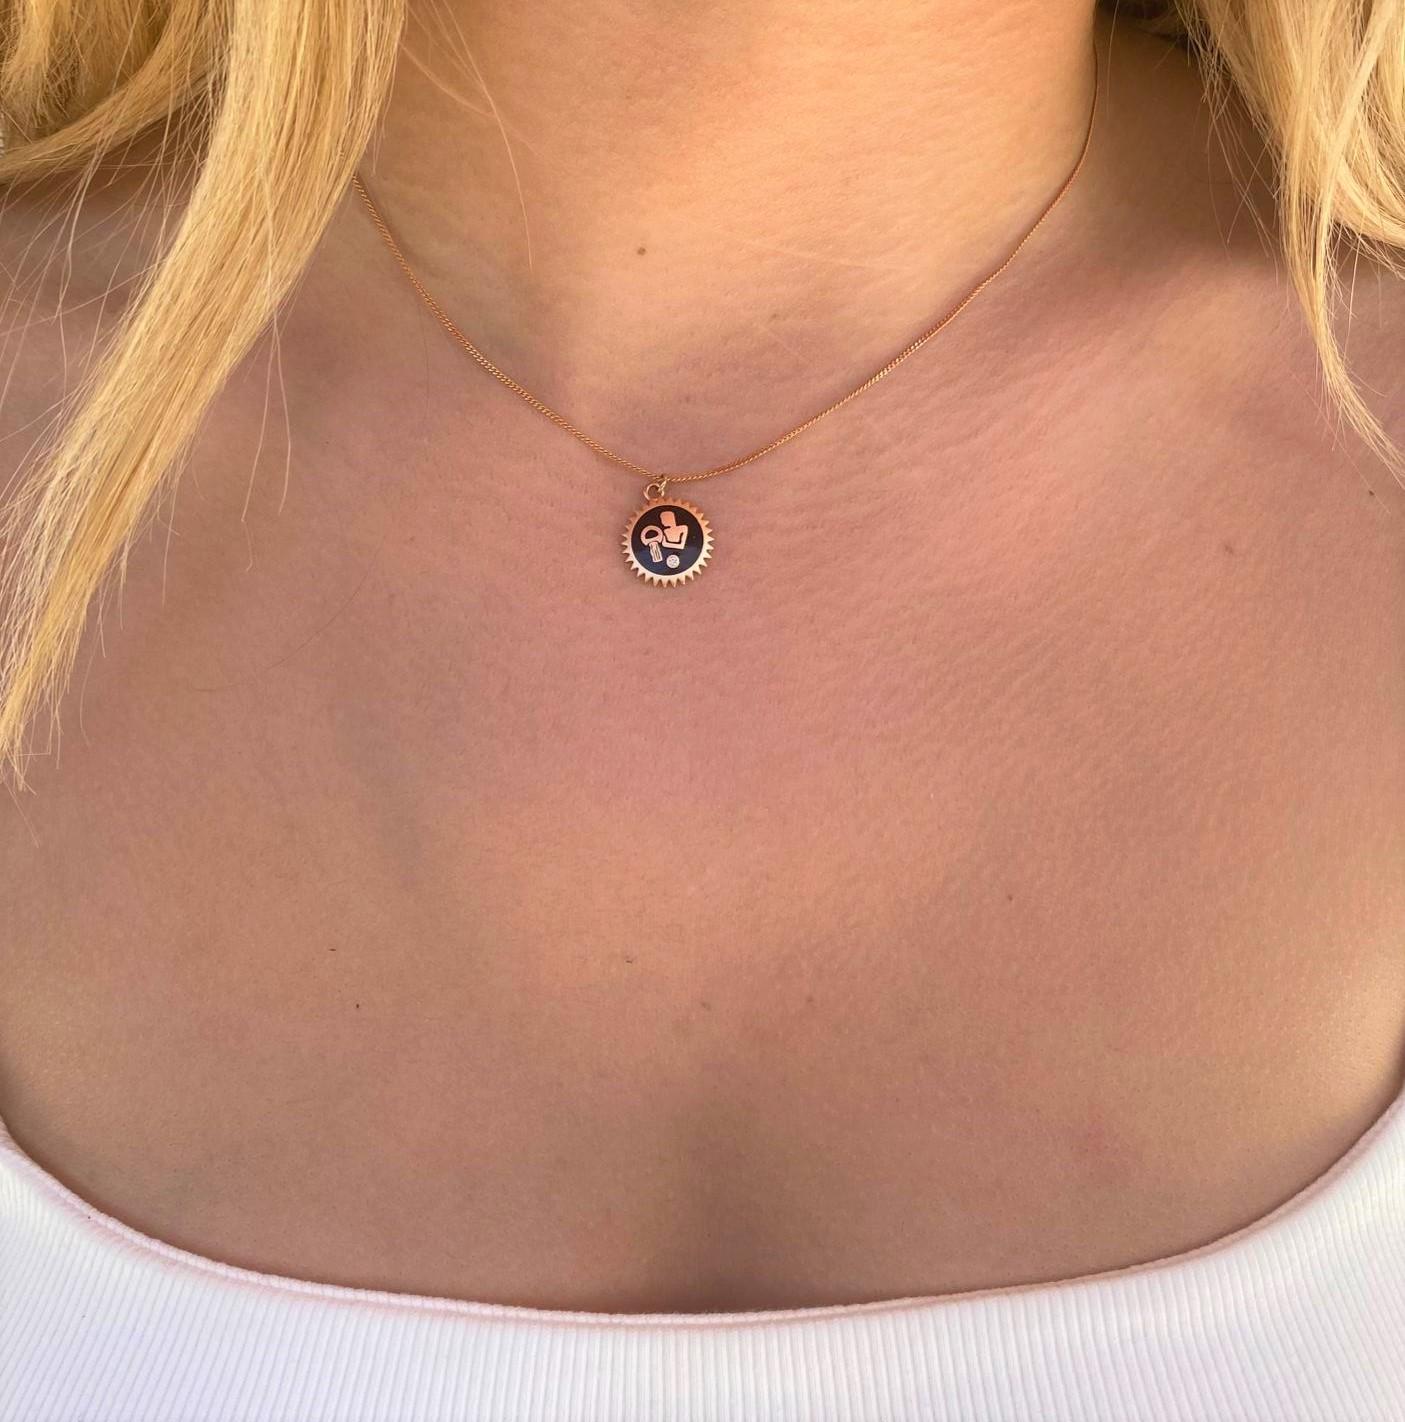 Aries necklace with black enamel & white diamond in 14k rose gold by selda jewellery

Additional Information:-
Collection: Zodiac collection
14K Rose gold
0.01ct White diamond
Pendant height 1cm
Chain length 40cm